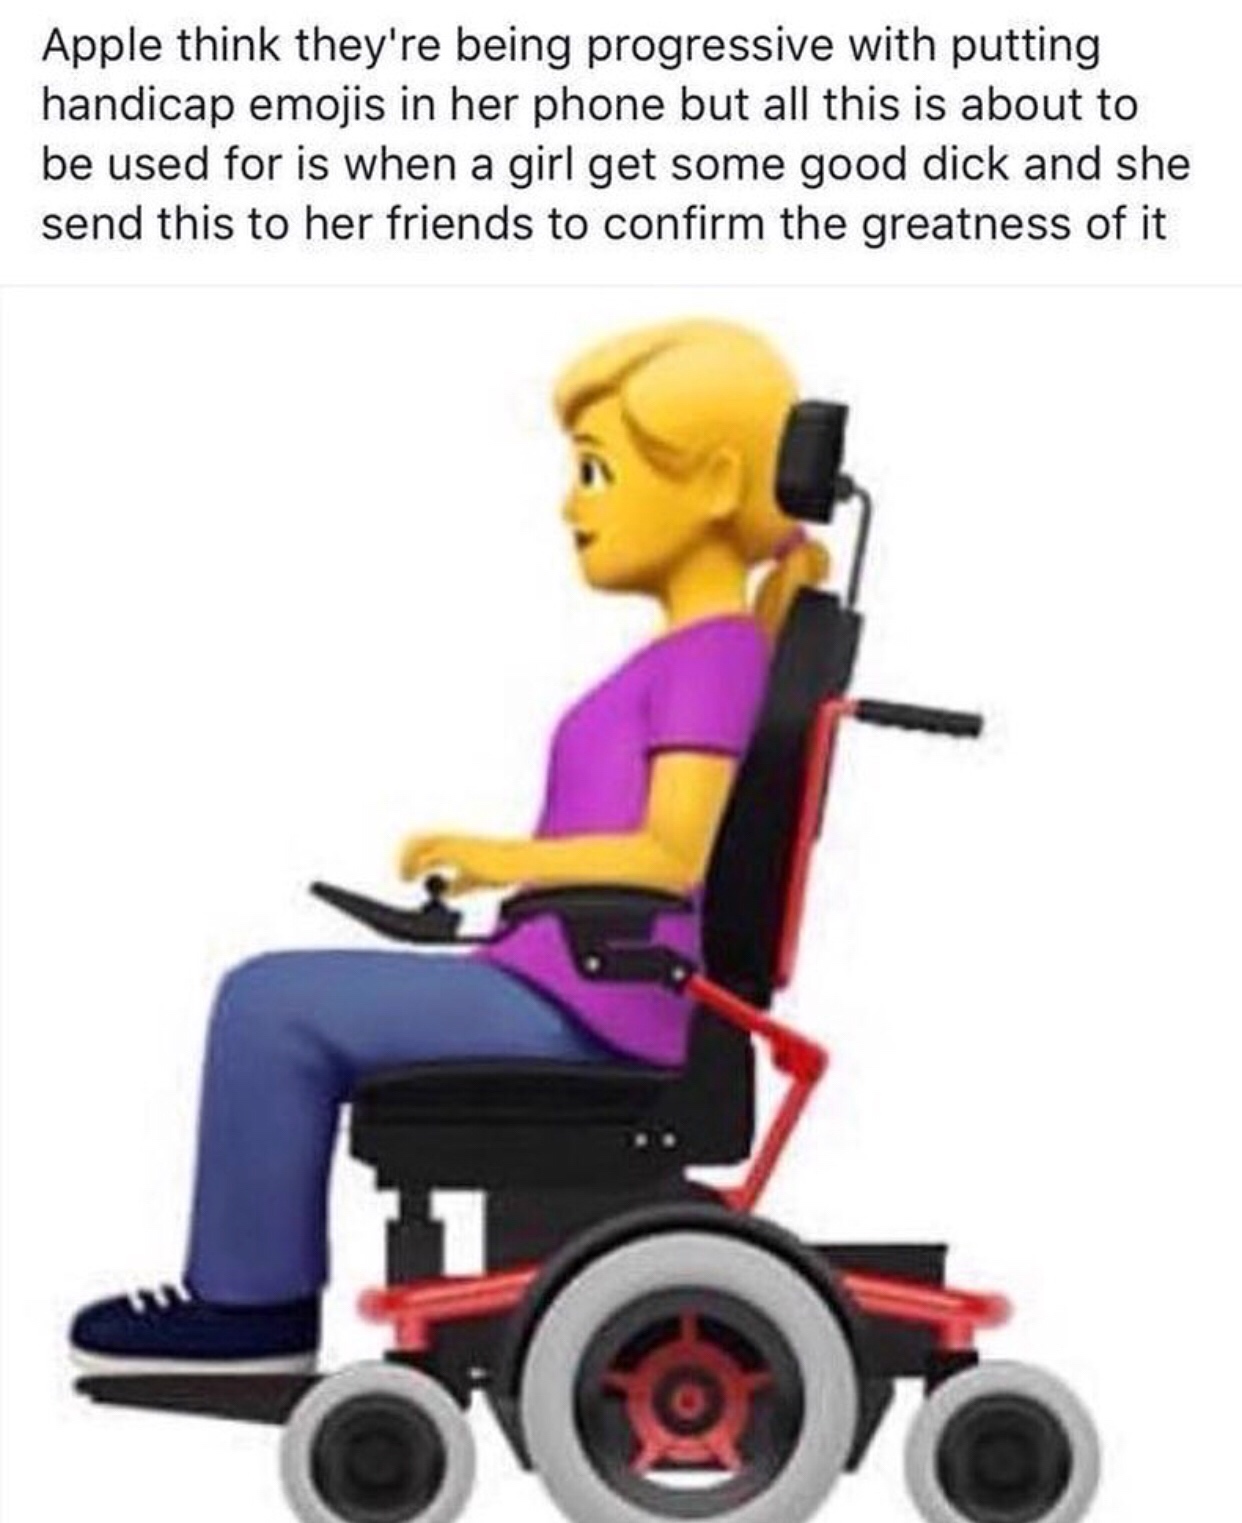 woman in wheelchair emoji - Apple think they're being progressive with putting handicap emojis in her phone but all this is about to be used for is when a girl get some good dick and she send this to her friends to confirm the greatness of it